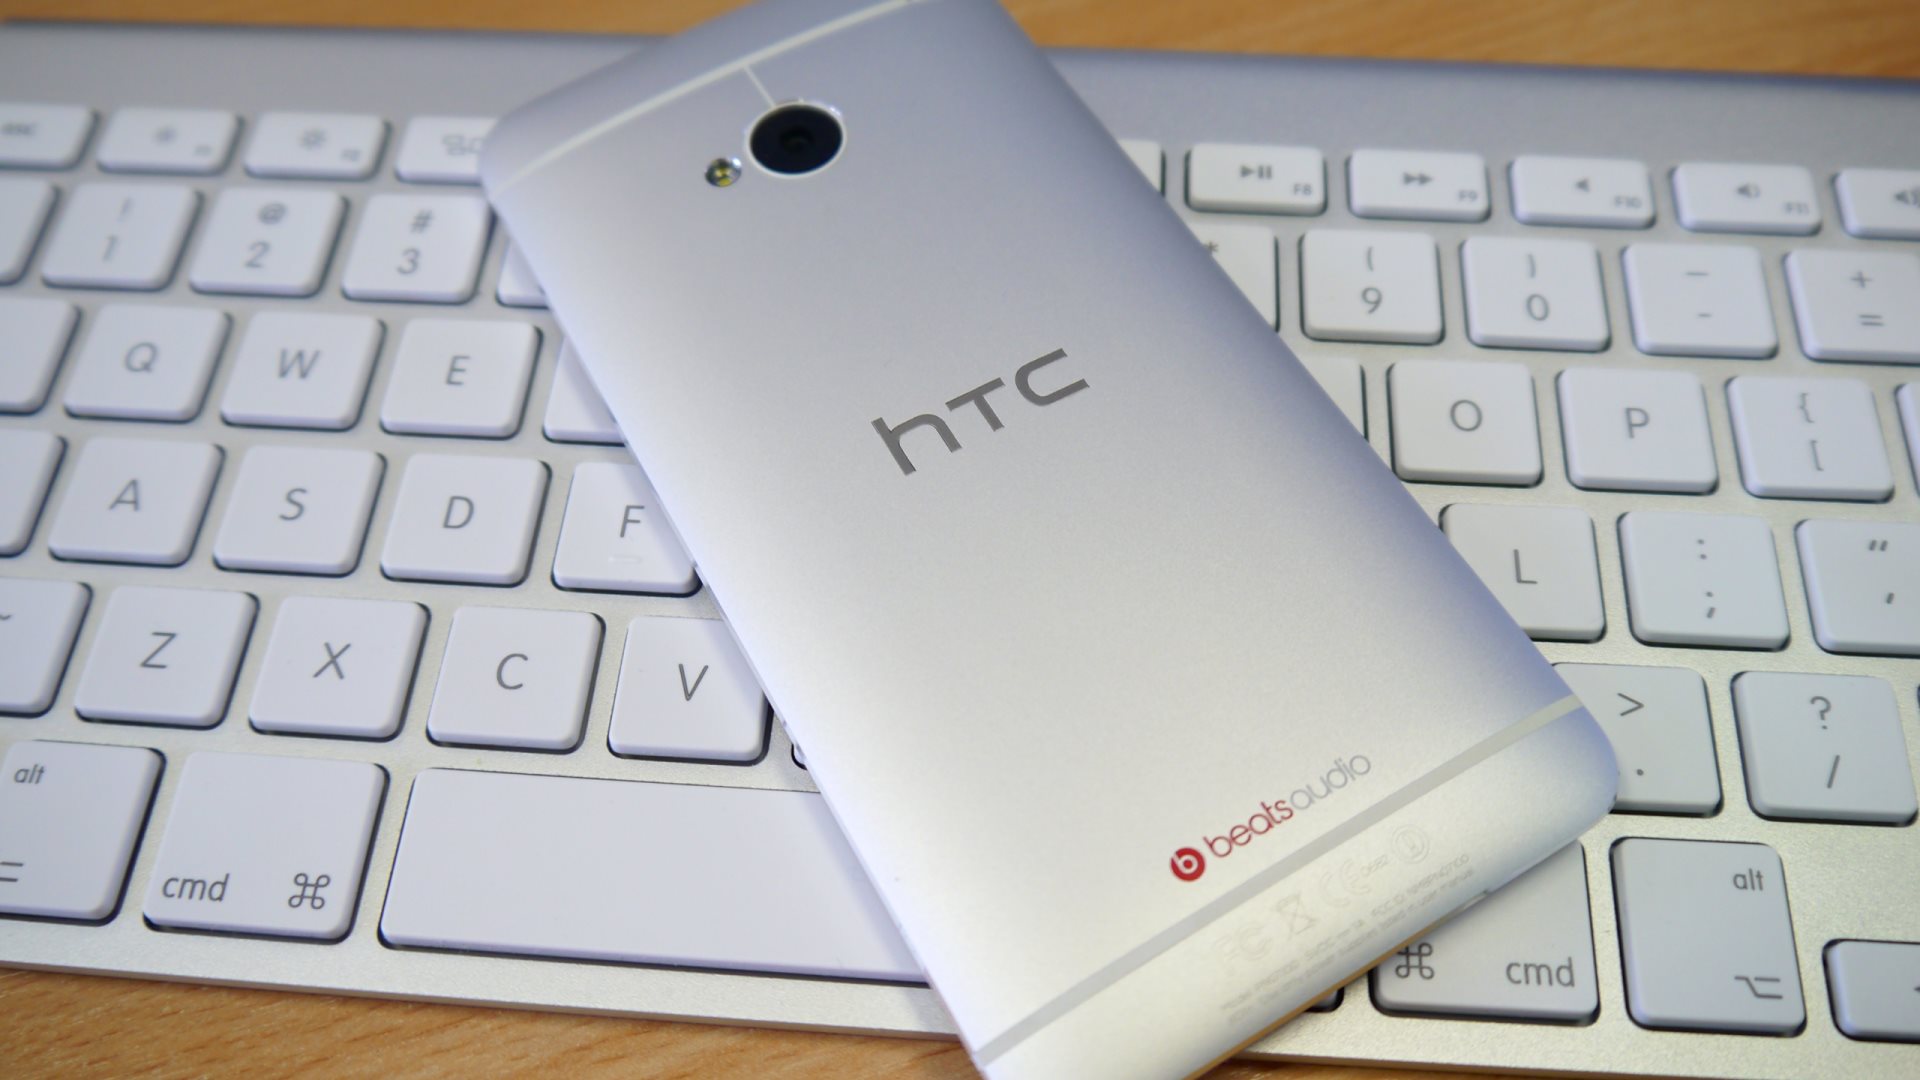 HD Wallpapers Pics: Htc one Wallpapers